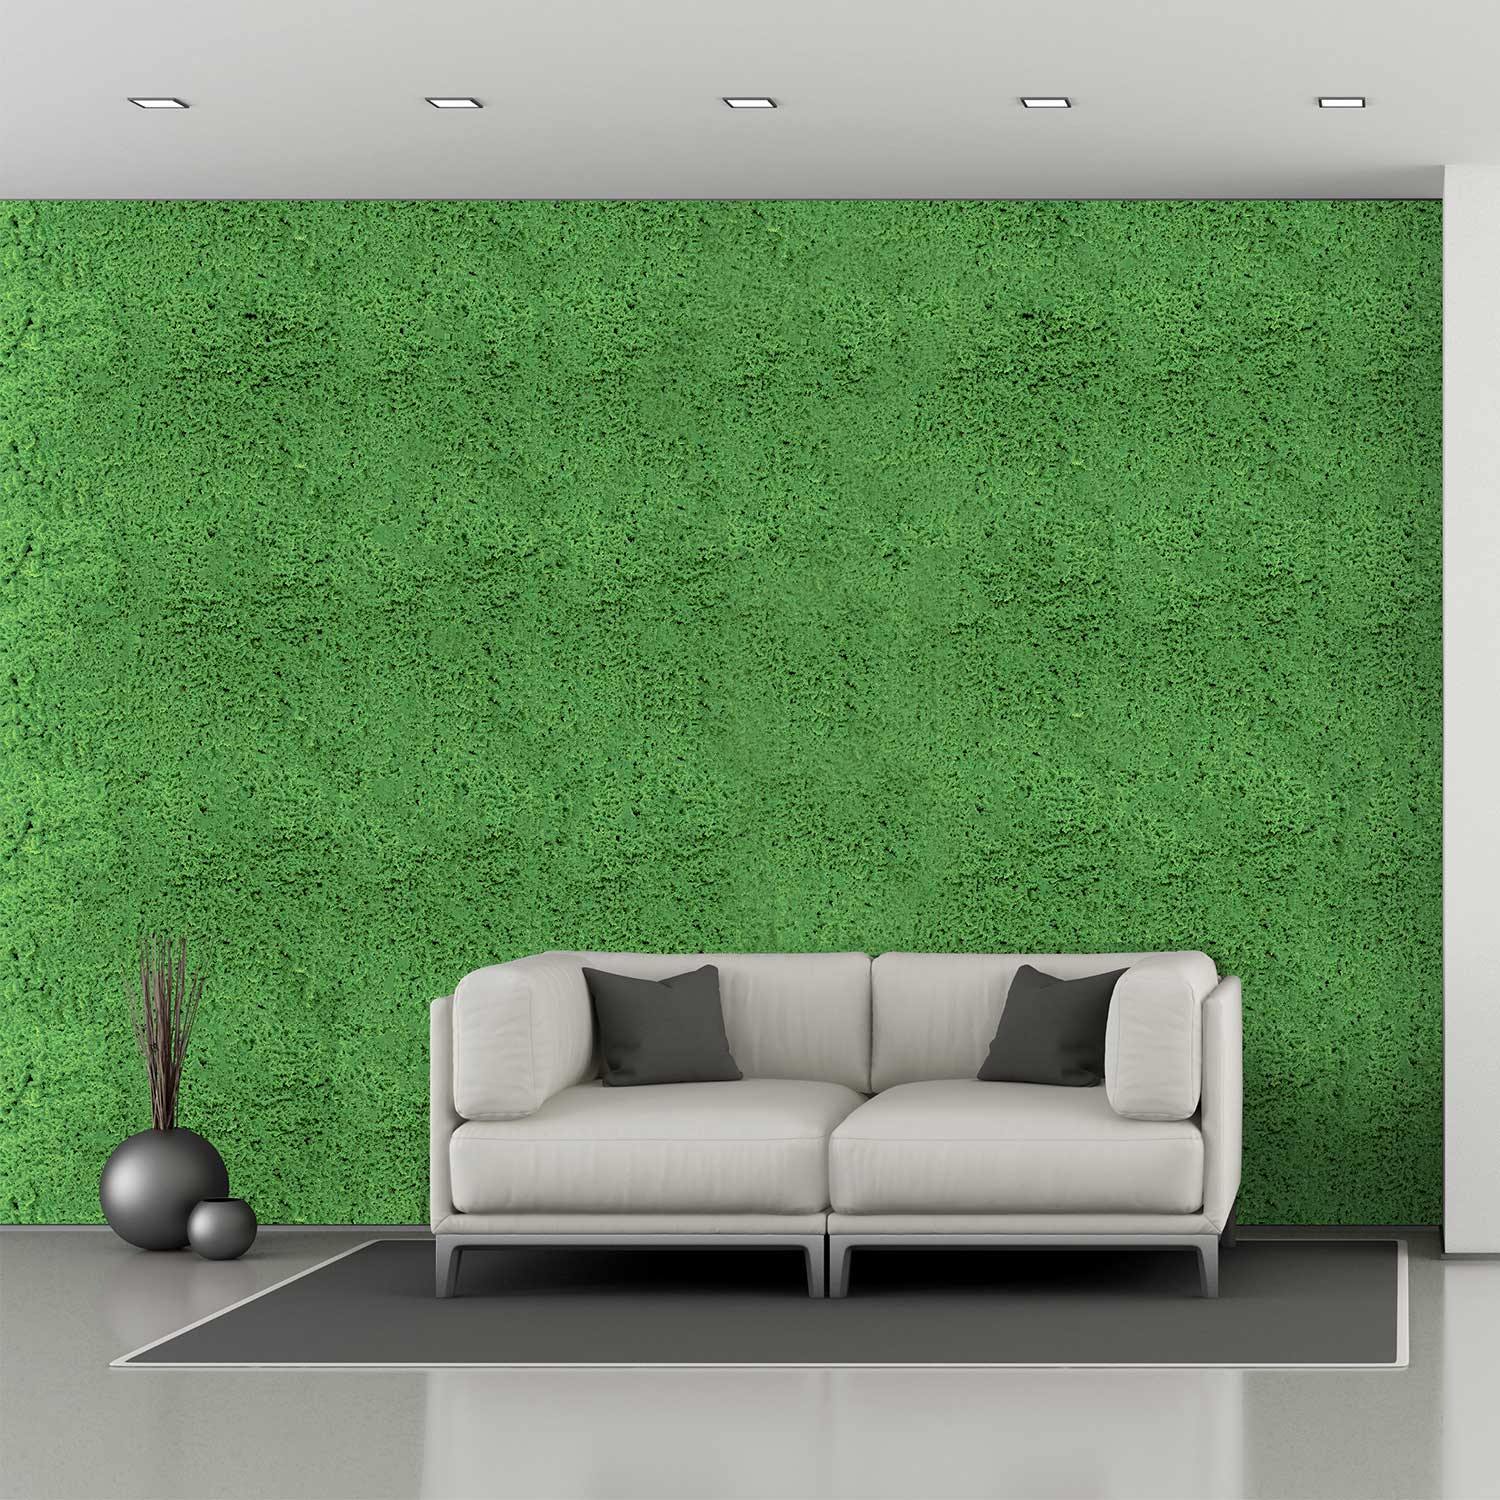 Nearly Natural 20 in. x 20 in. Artificial Moss Mat